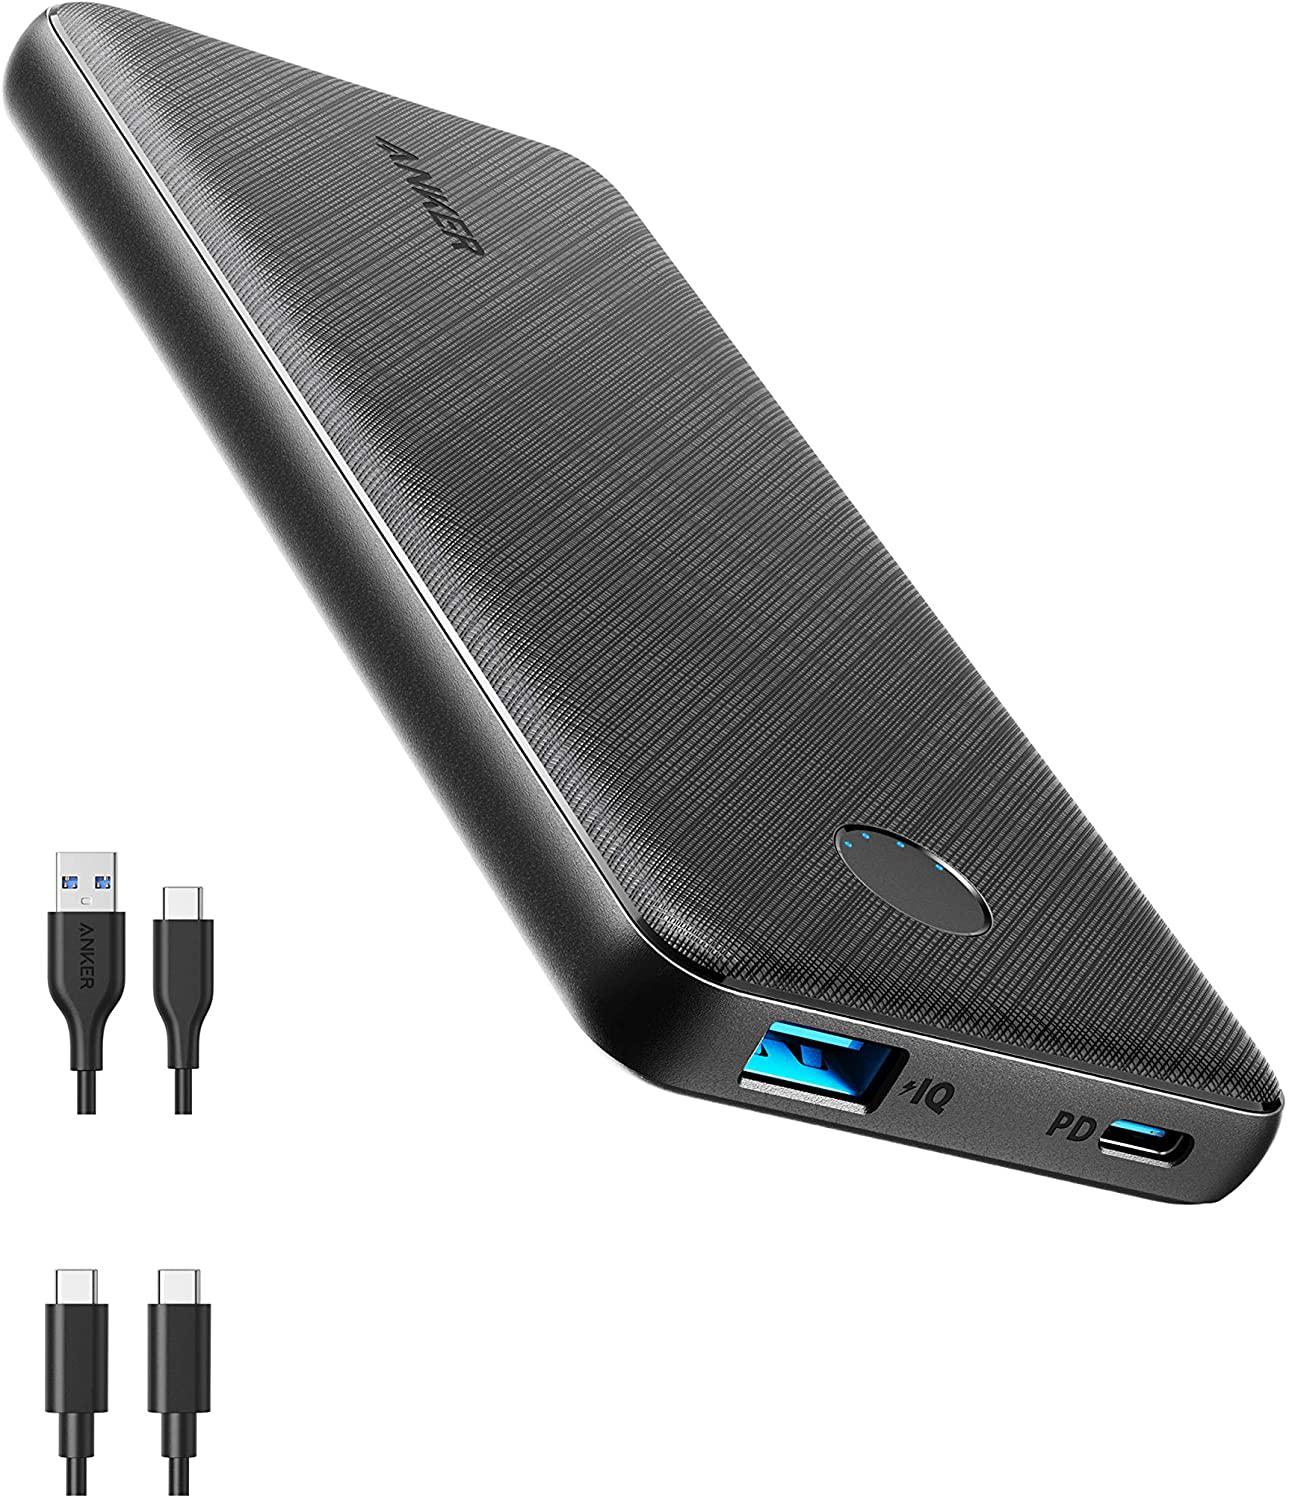 Anker A1244 Power Bank-review malaysia